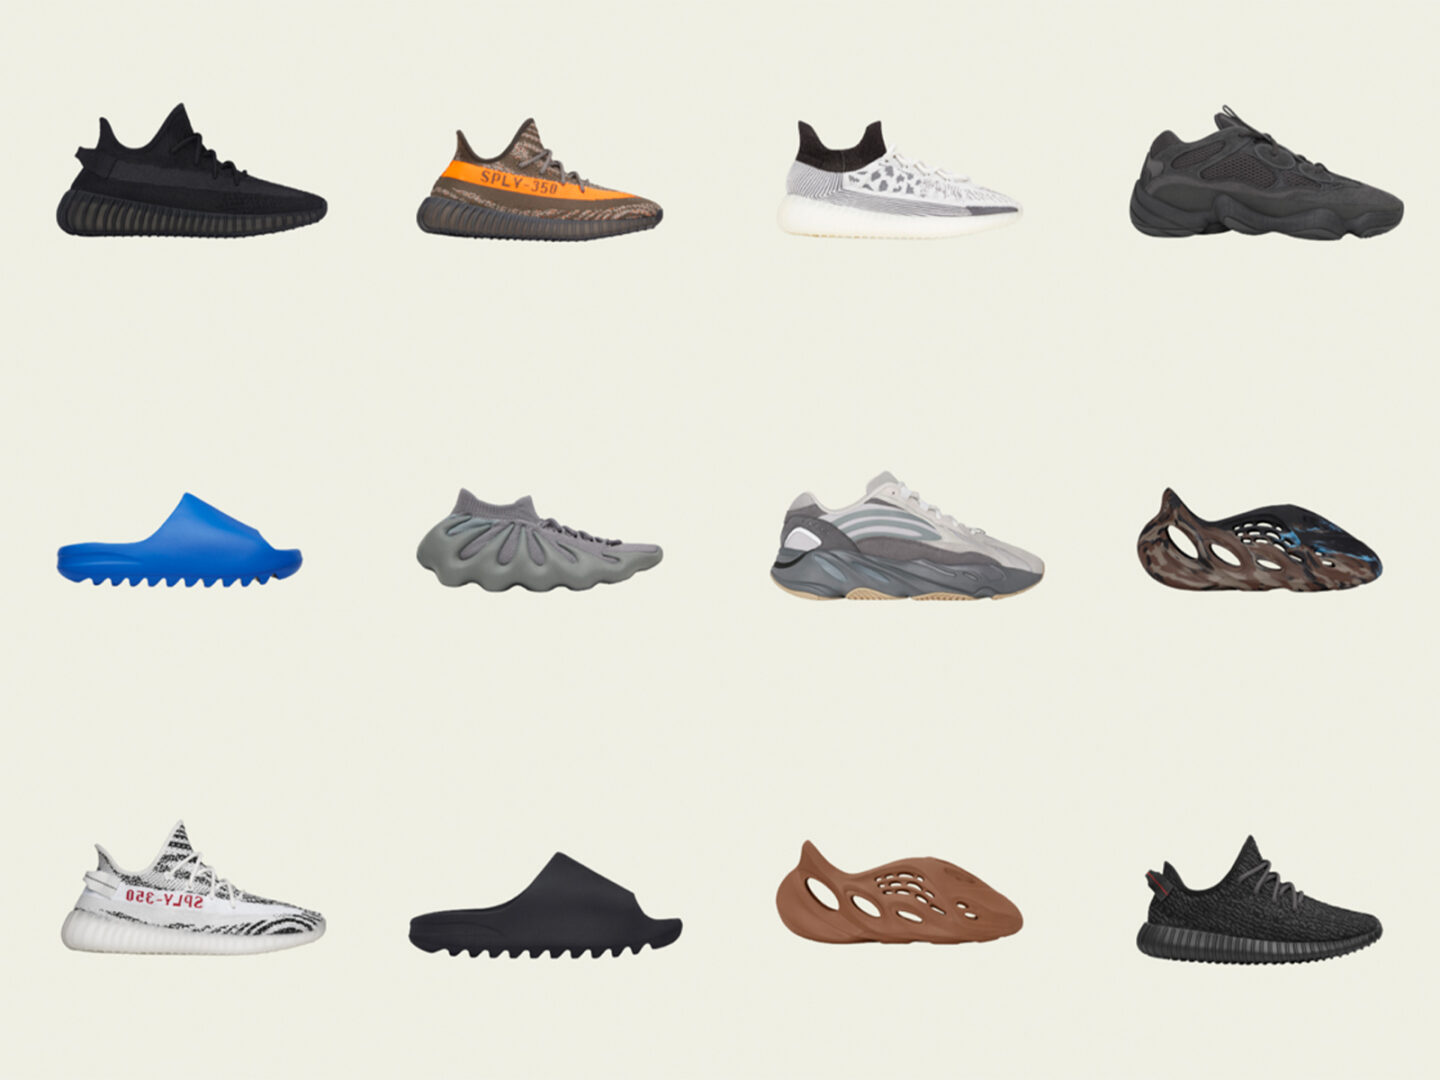 adidas will continue to sell surplus YEEZYs for at least cost price